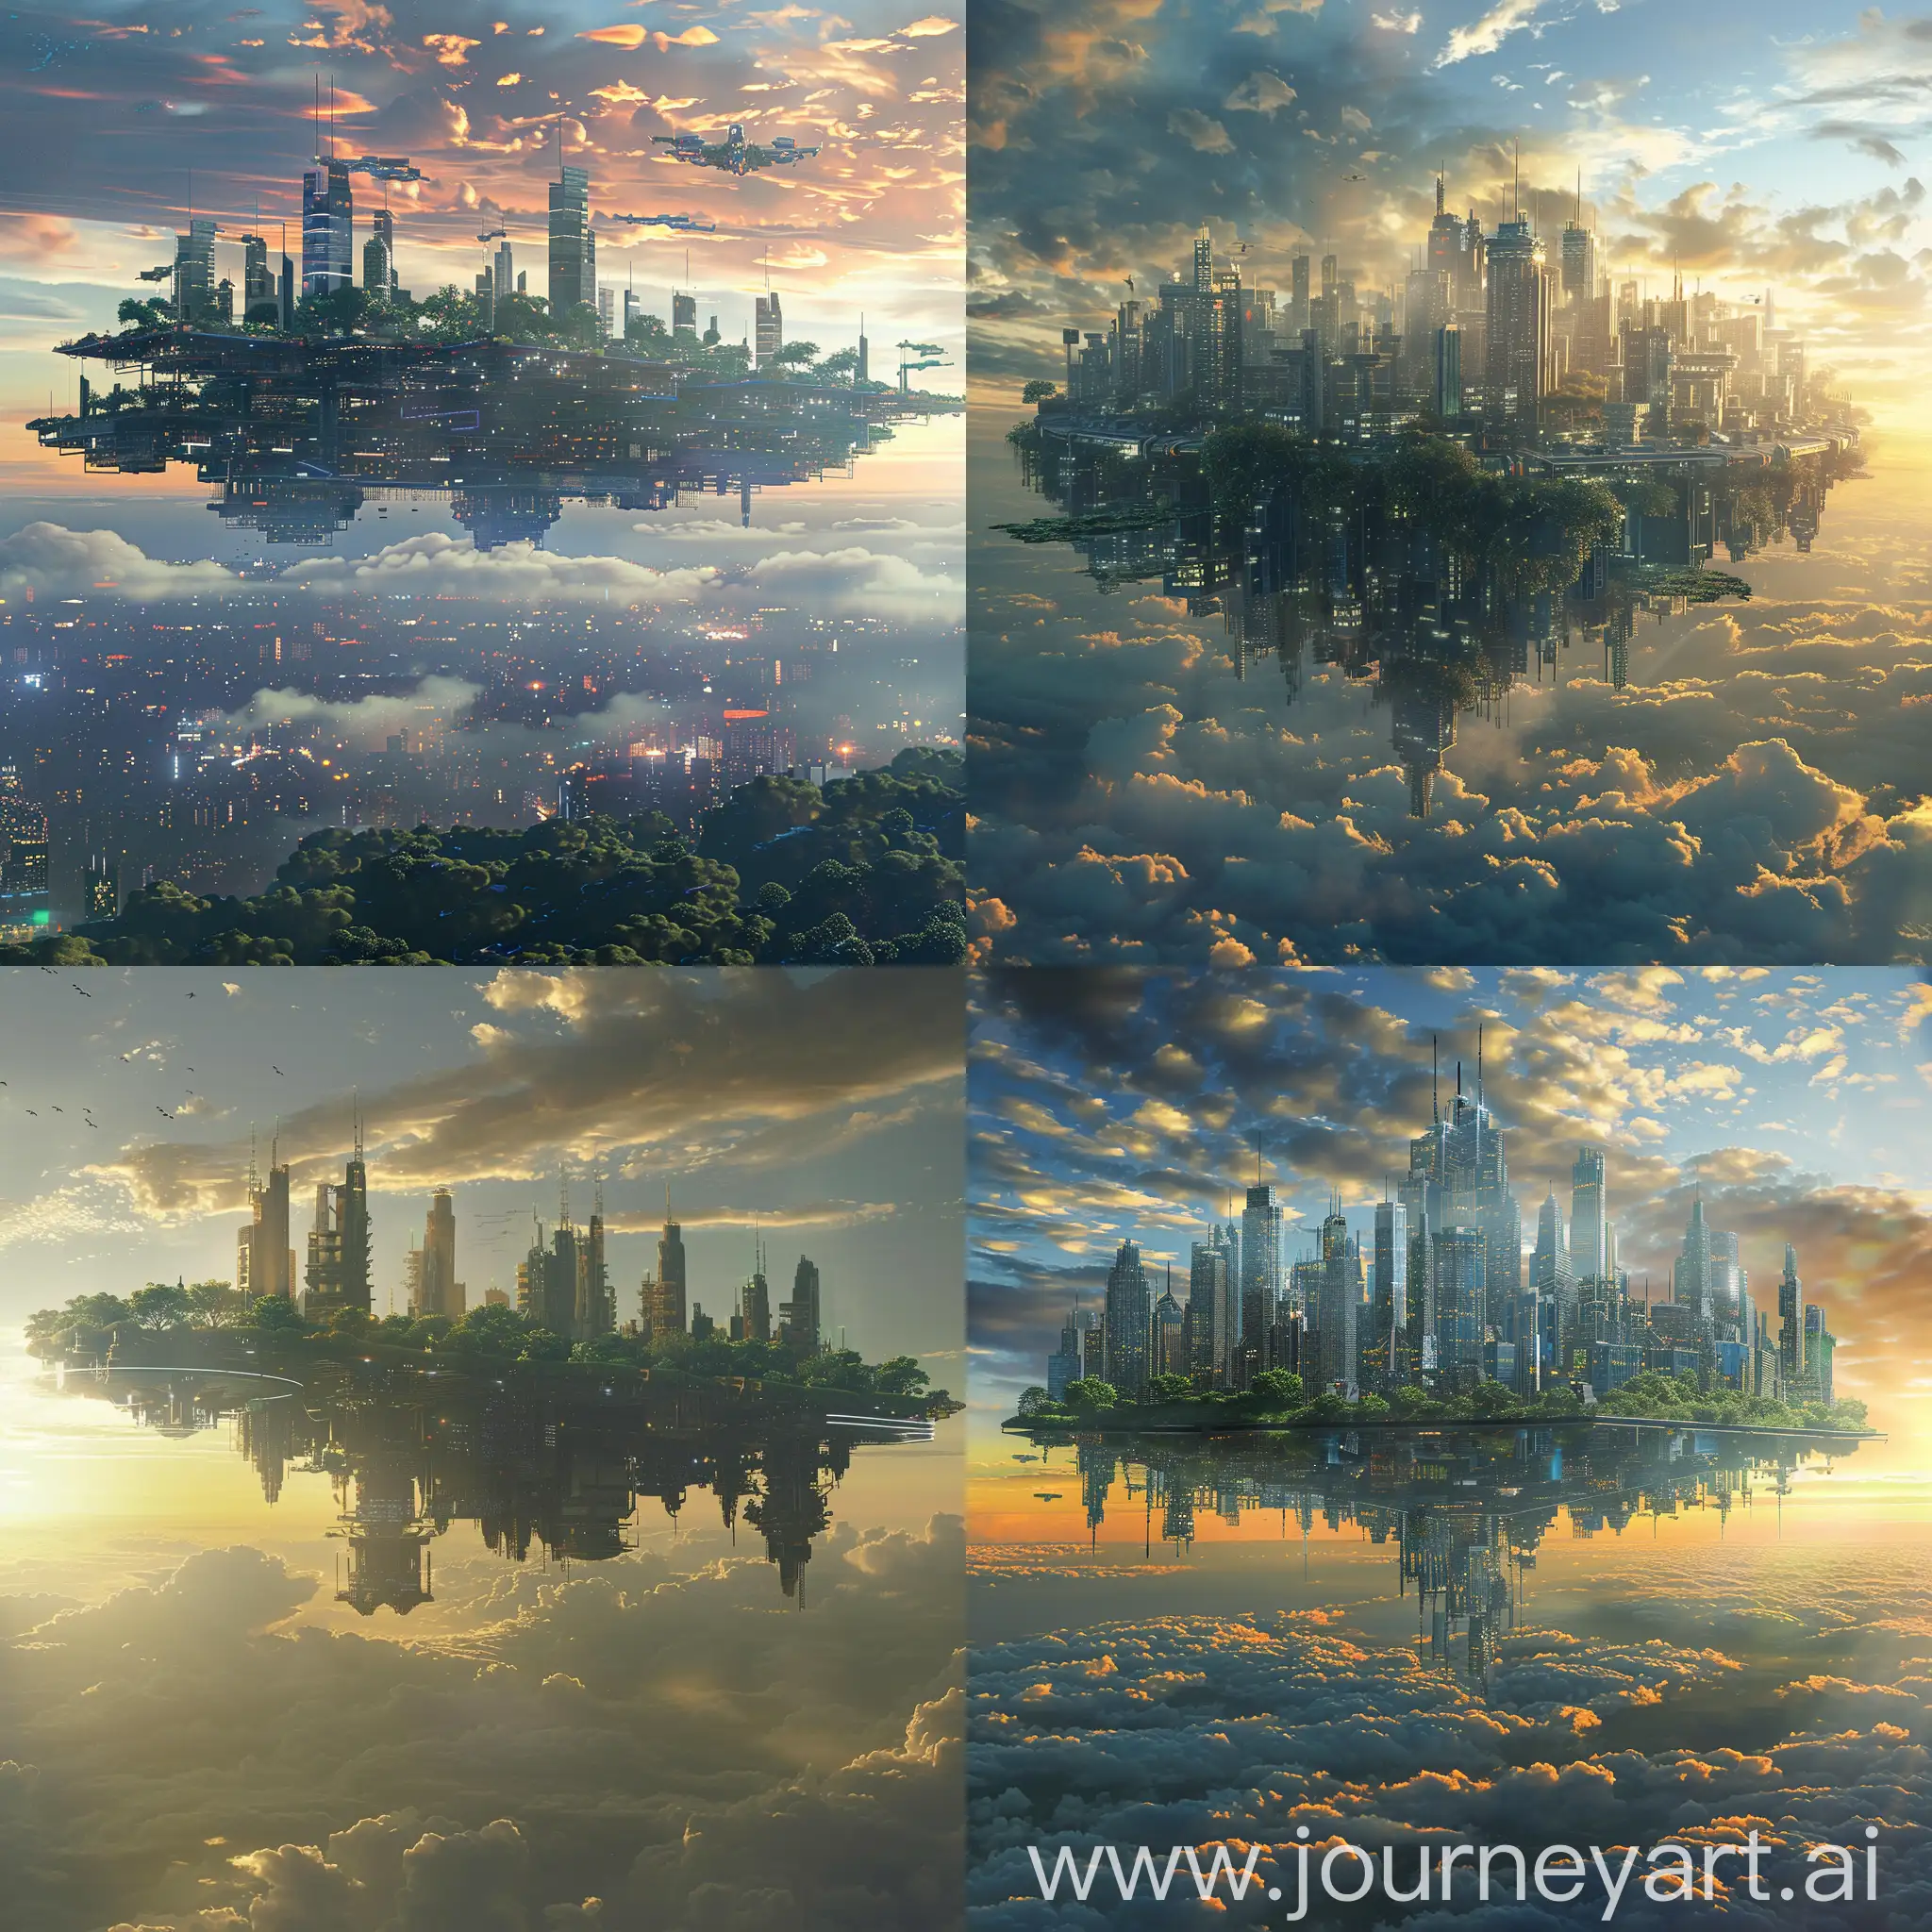 Futuristic-Skyborne-Metropolis-at-Dawn-with-Verdant-Skyscrapers-and-Flying-Platforms